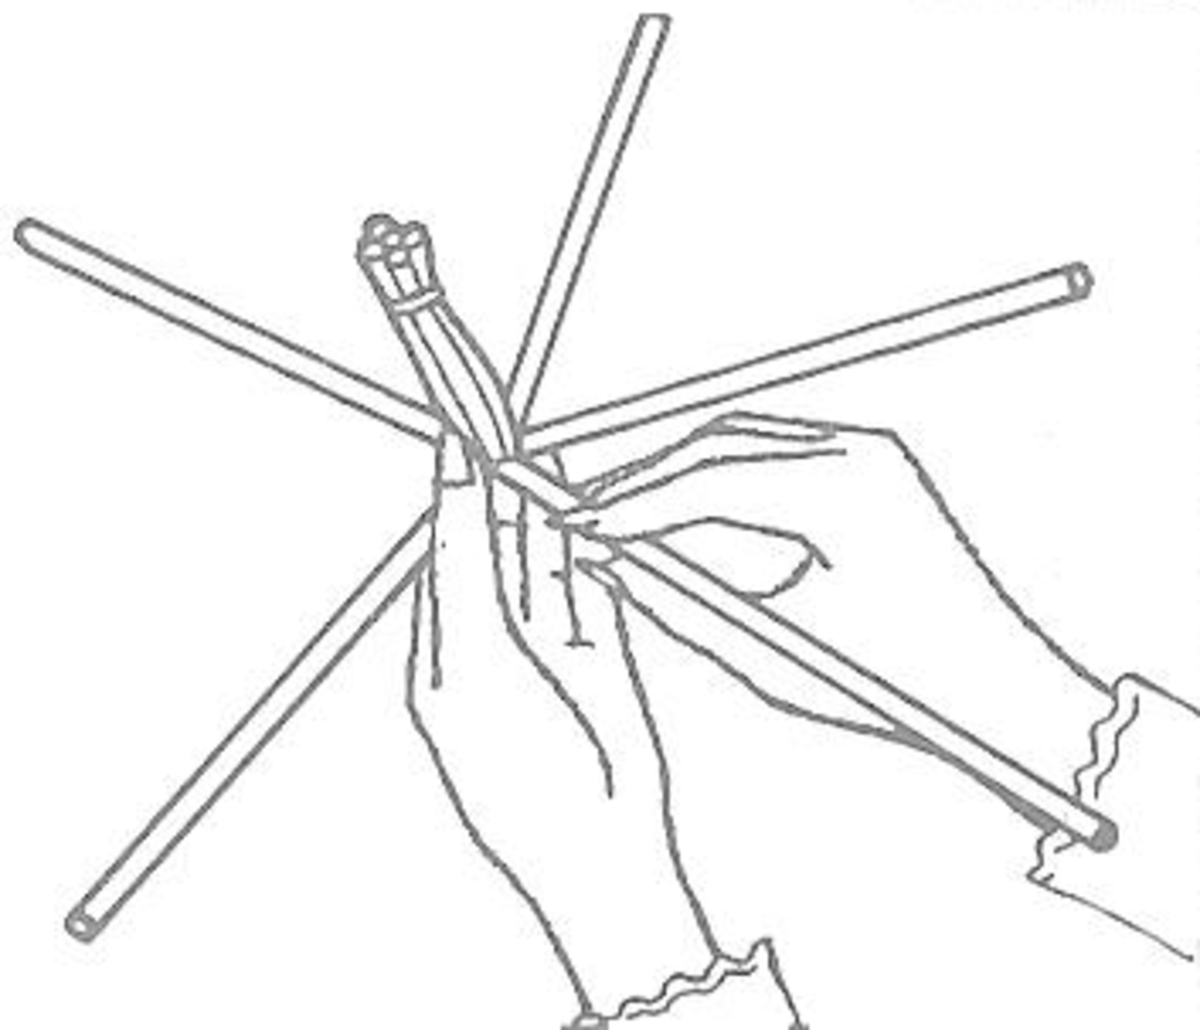 Figure 1: Weaving Round a Former - First Stage